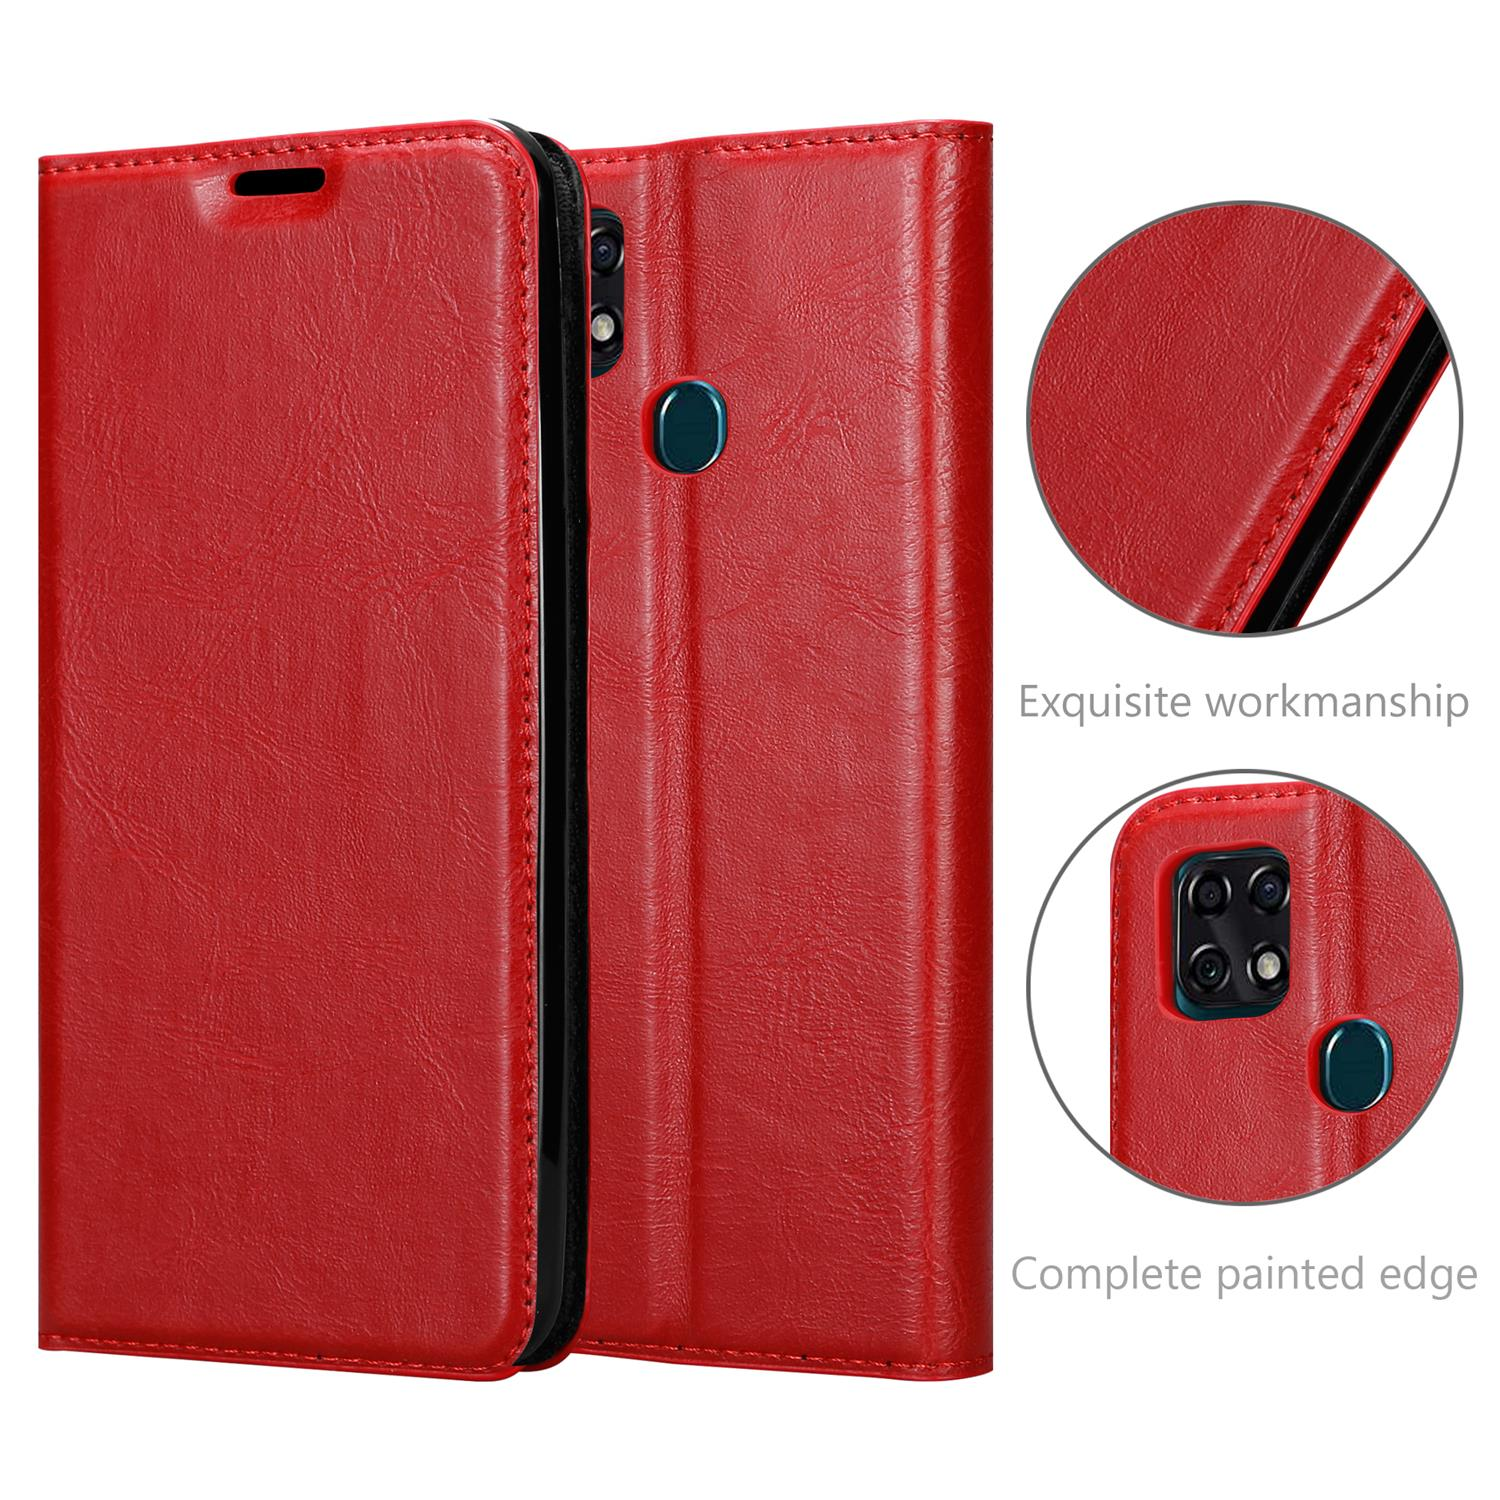 Book Blade Magnet, 10 APFEL ZTE, Bookcover, CADORABO Hülle Invisible ROT SMART,